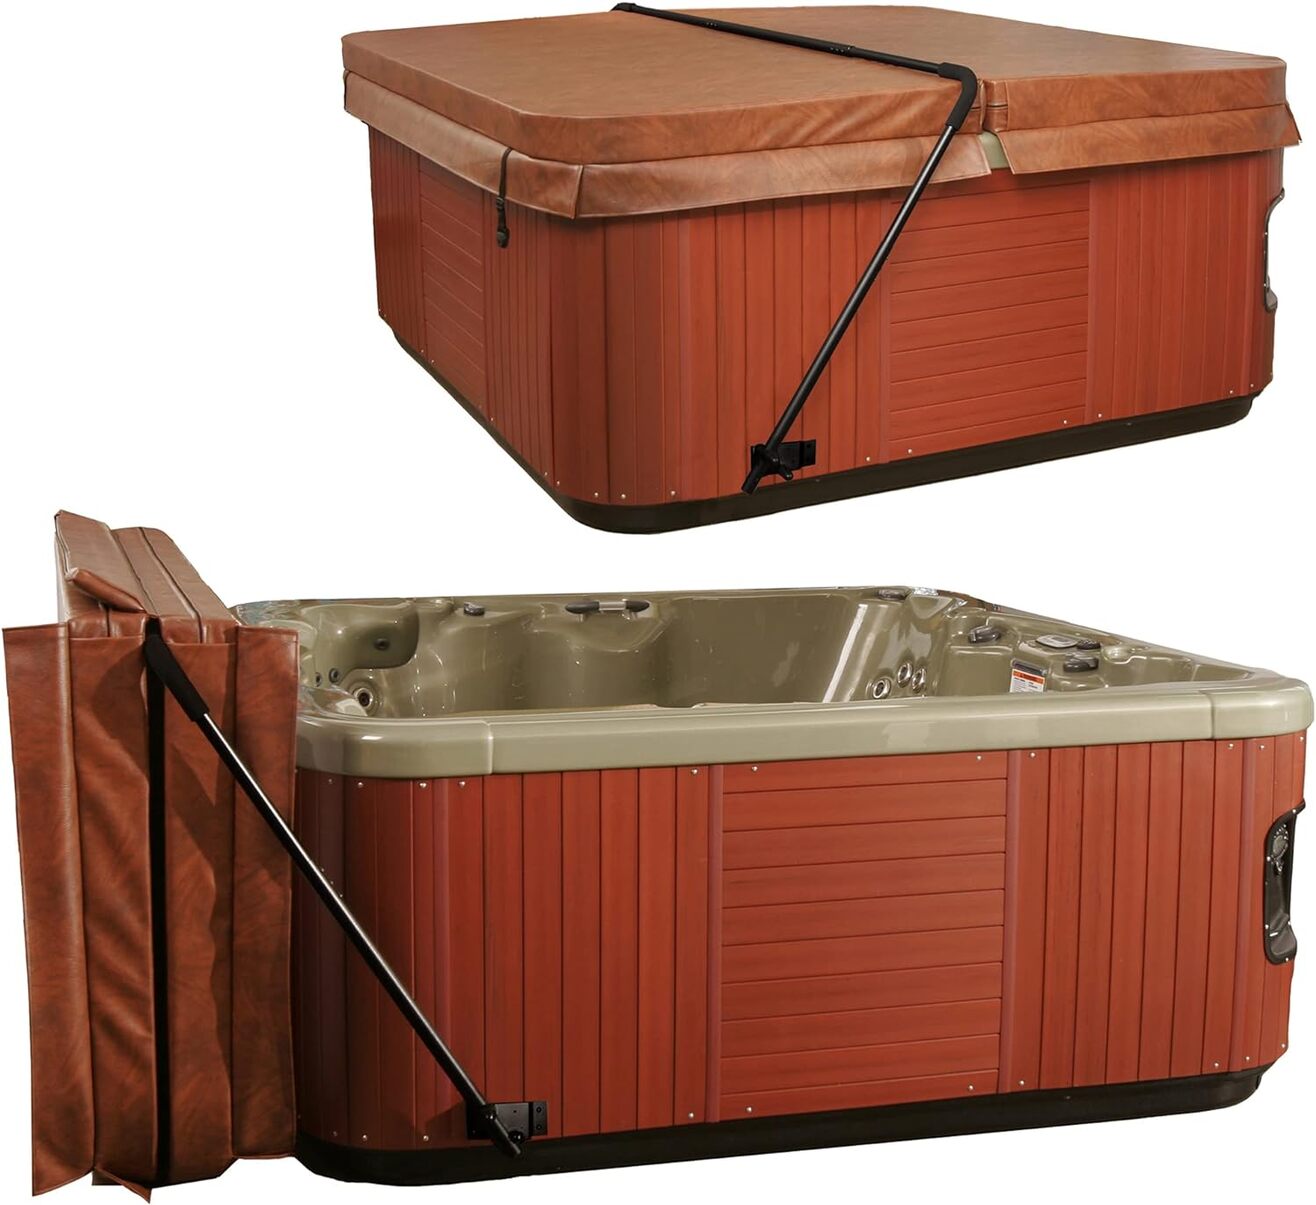 The-10-Best-Hot-Tub-Cover-Lifter-Reviews-of-2022-TN